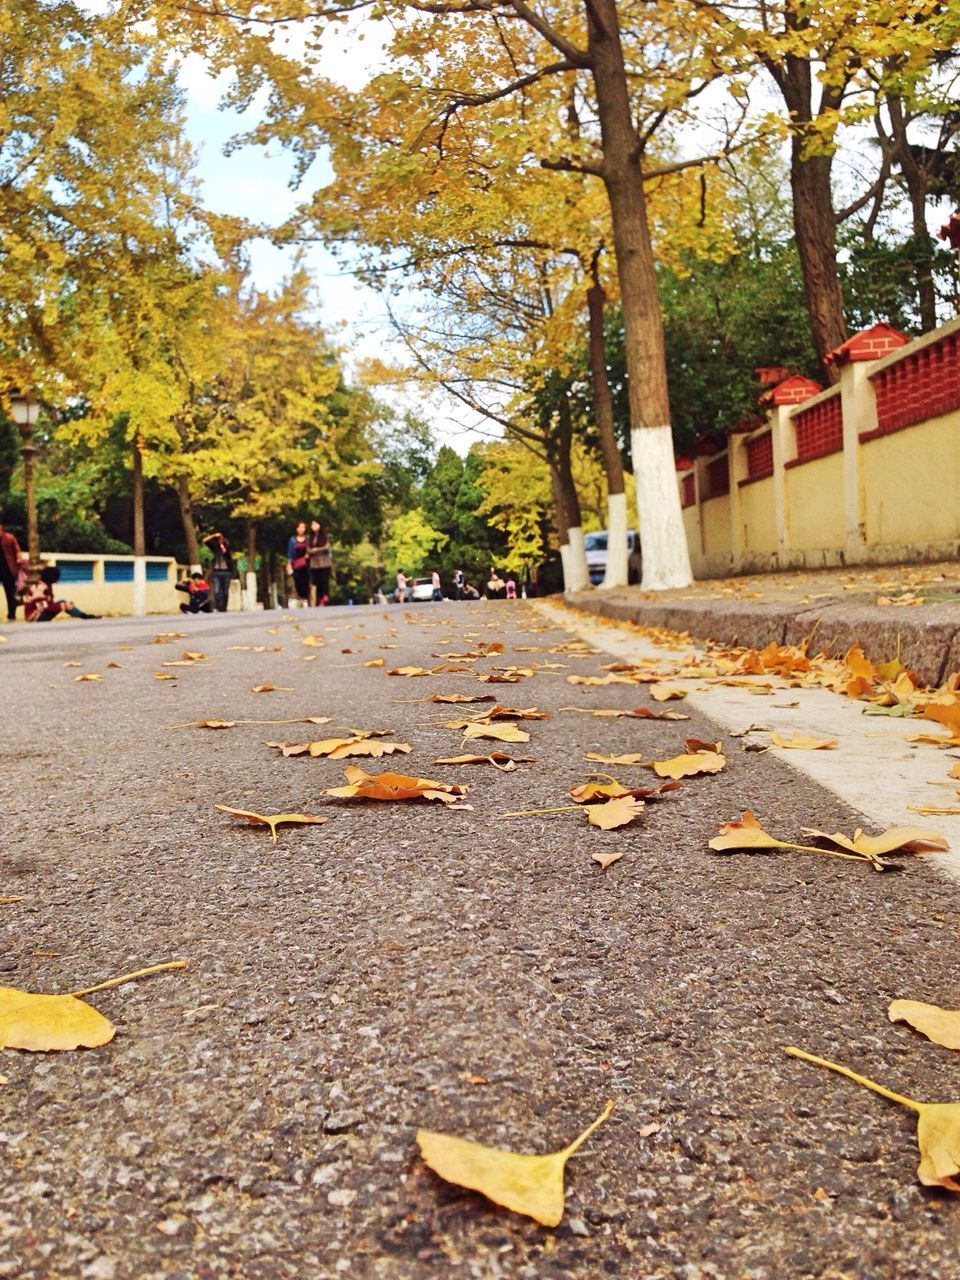 tree, autumn, change, leaf, transportation, season, yellow, road, fallen, street, the way forward, leaves, asphalt, day, surface level, park - man made space, incidental people, nature, falling, outdoors